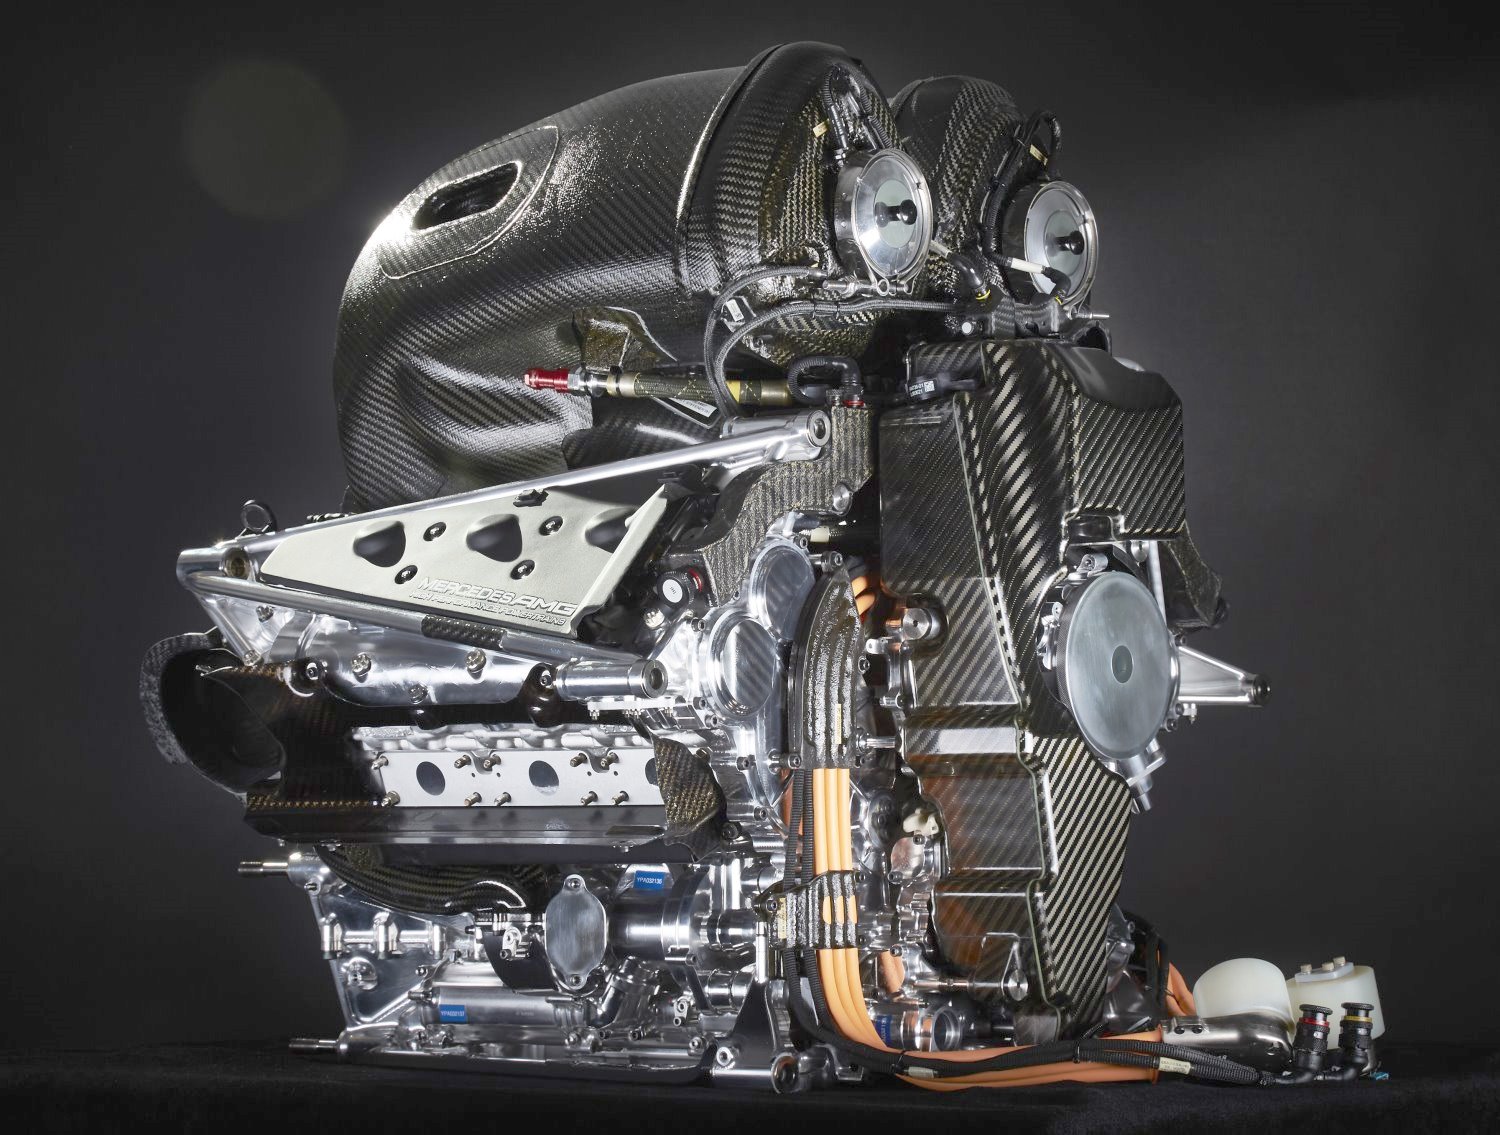 F1 engines must last 11 to 12 races each starting in 2019